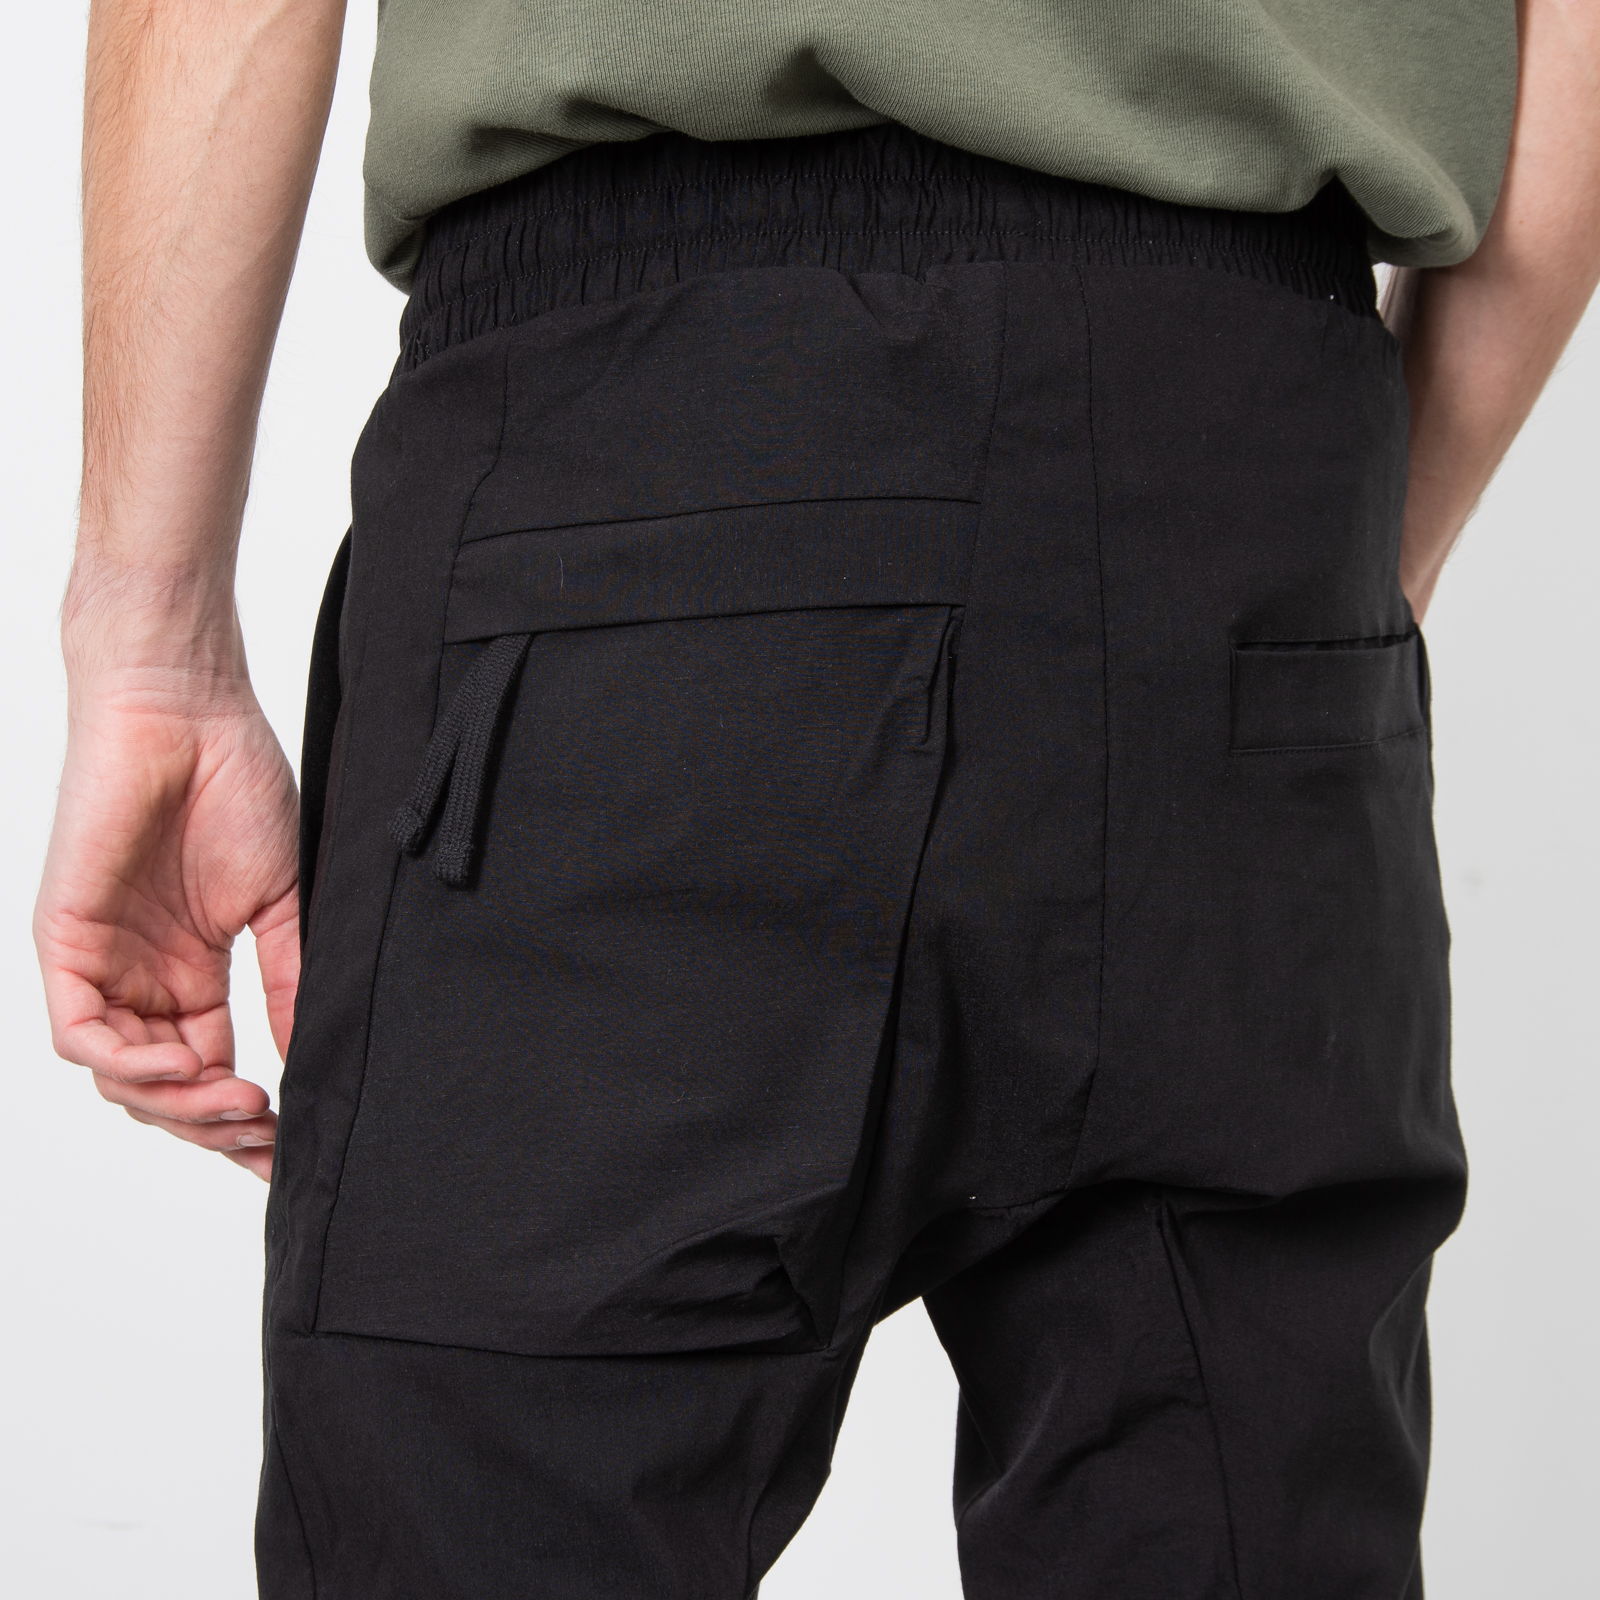 BLACK TAPERED DROP CROTCH PANTS|wolfensson